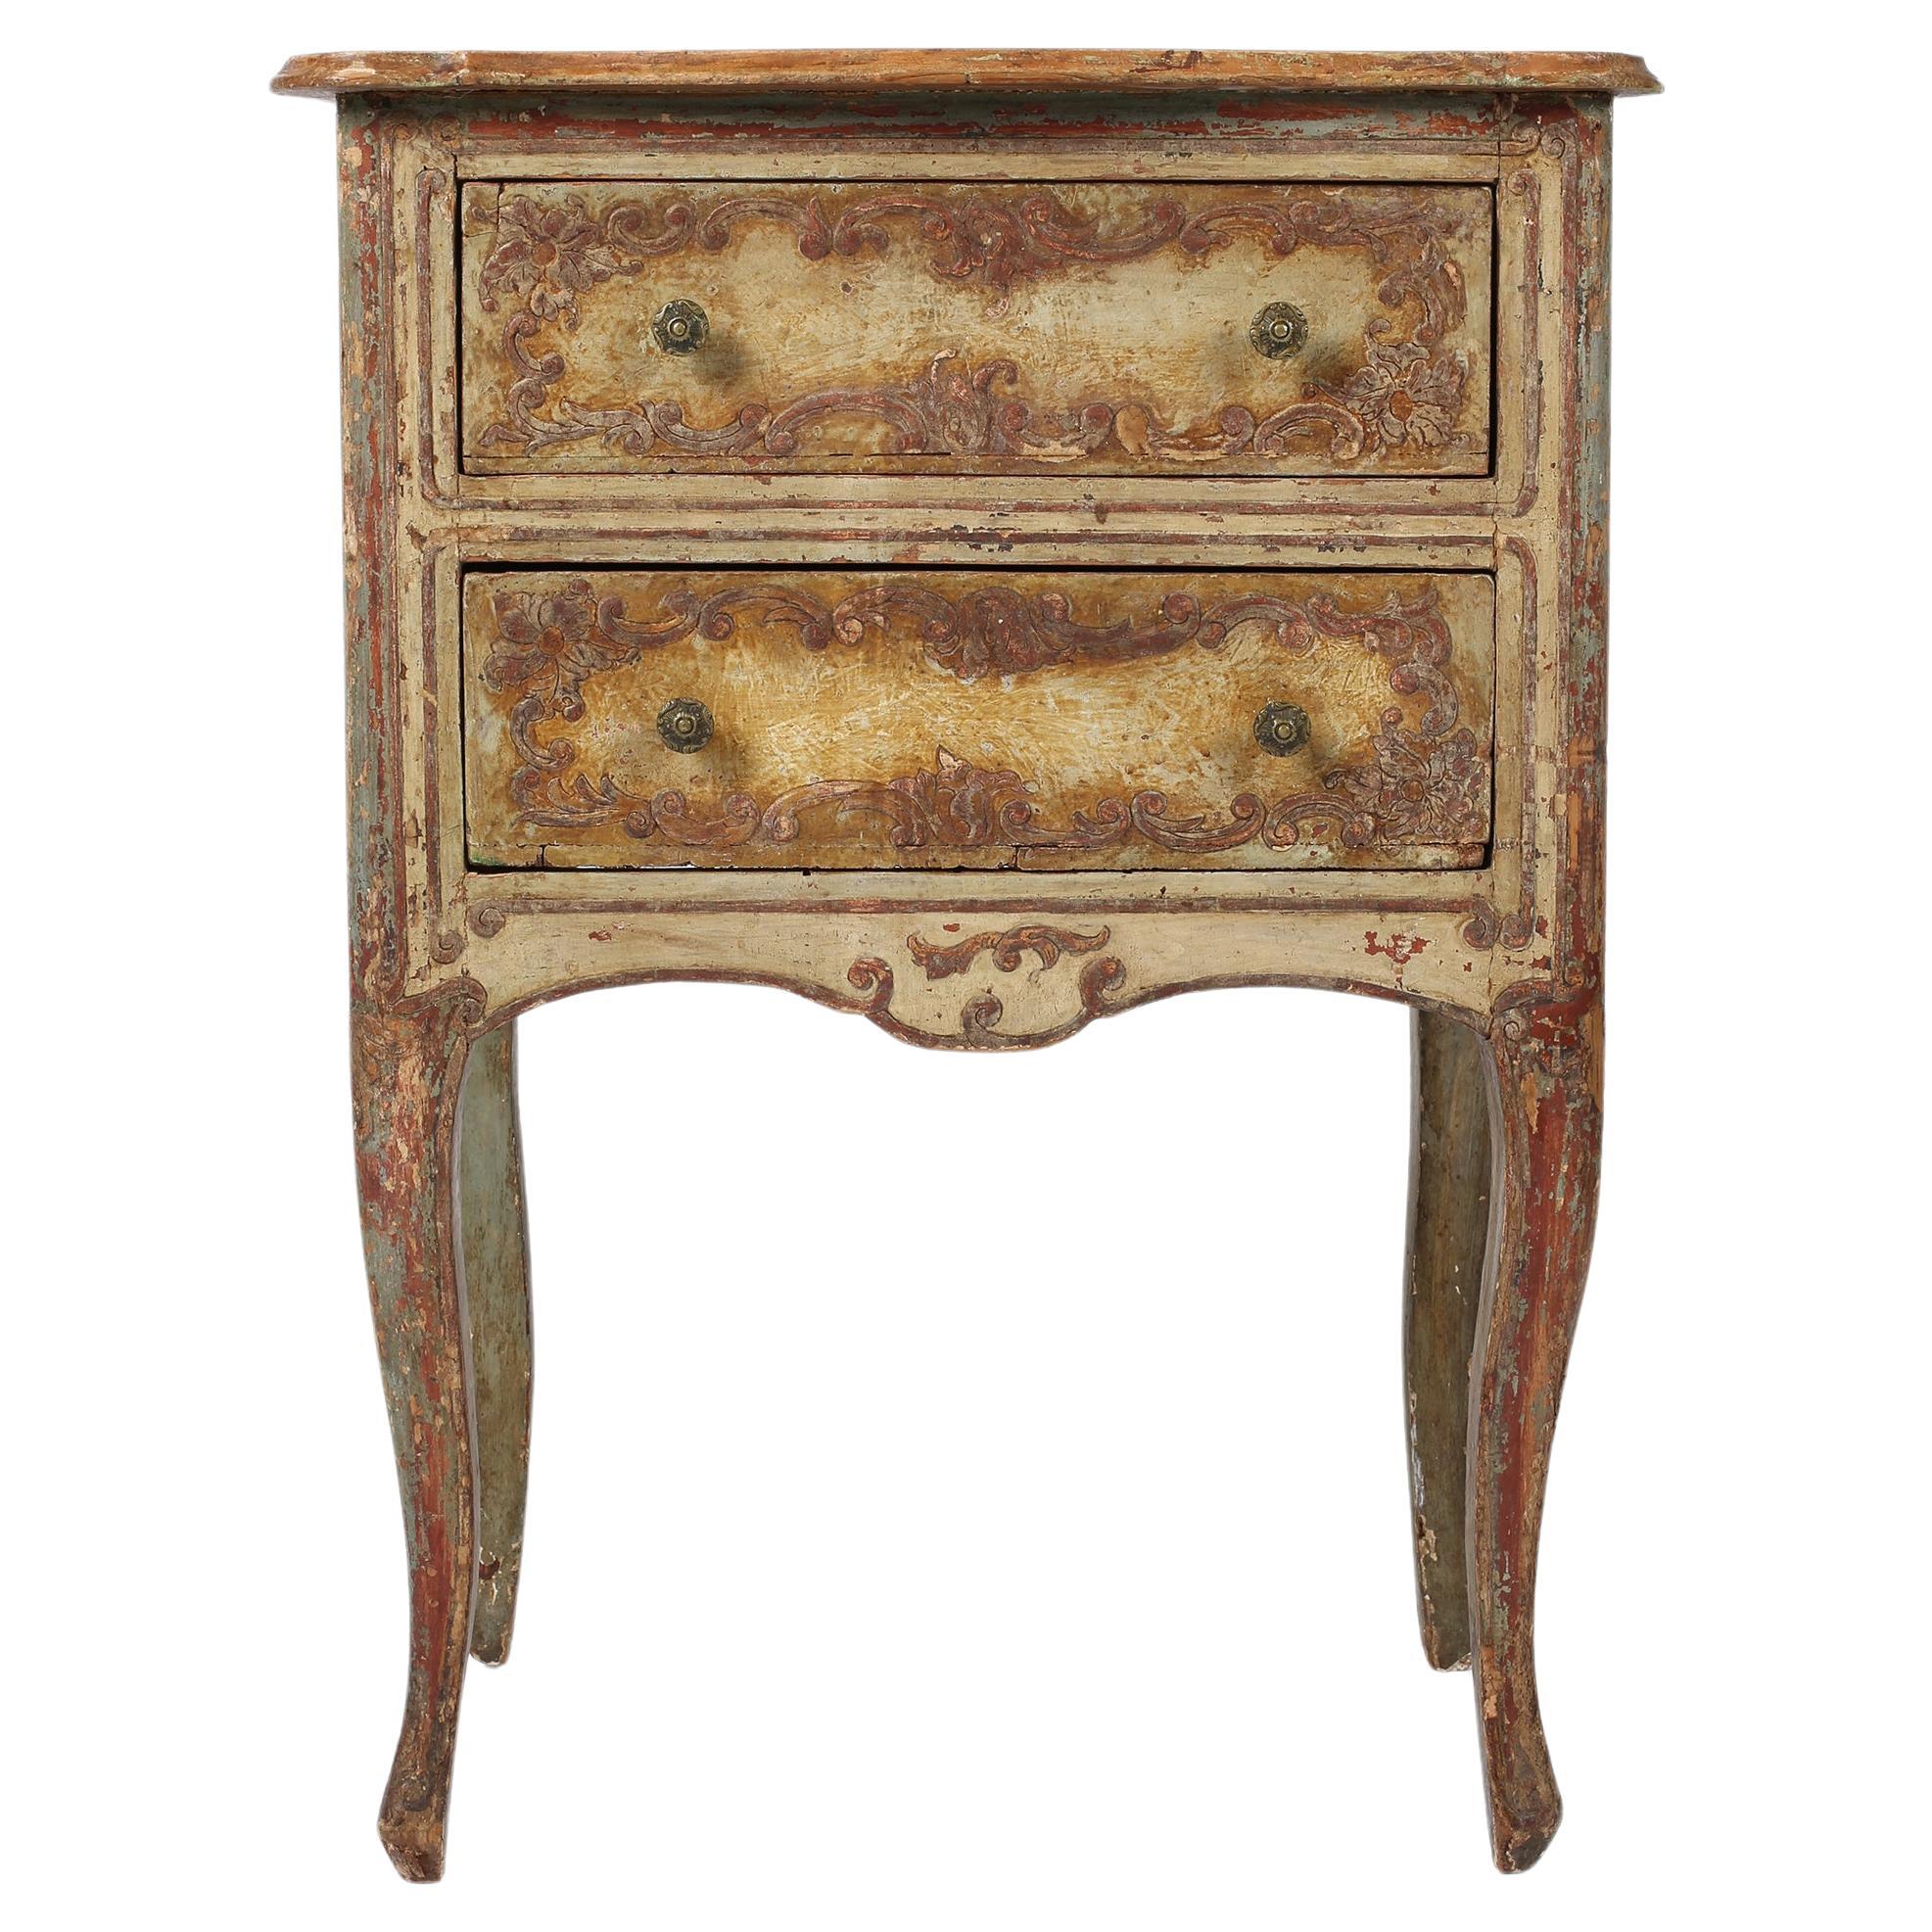 Early 19th Century Italian Florentine Painted Side Table Chest Bedside